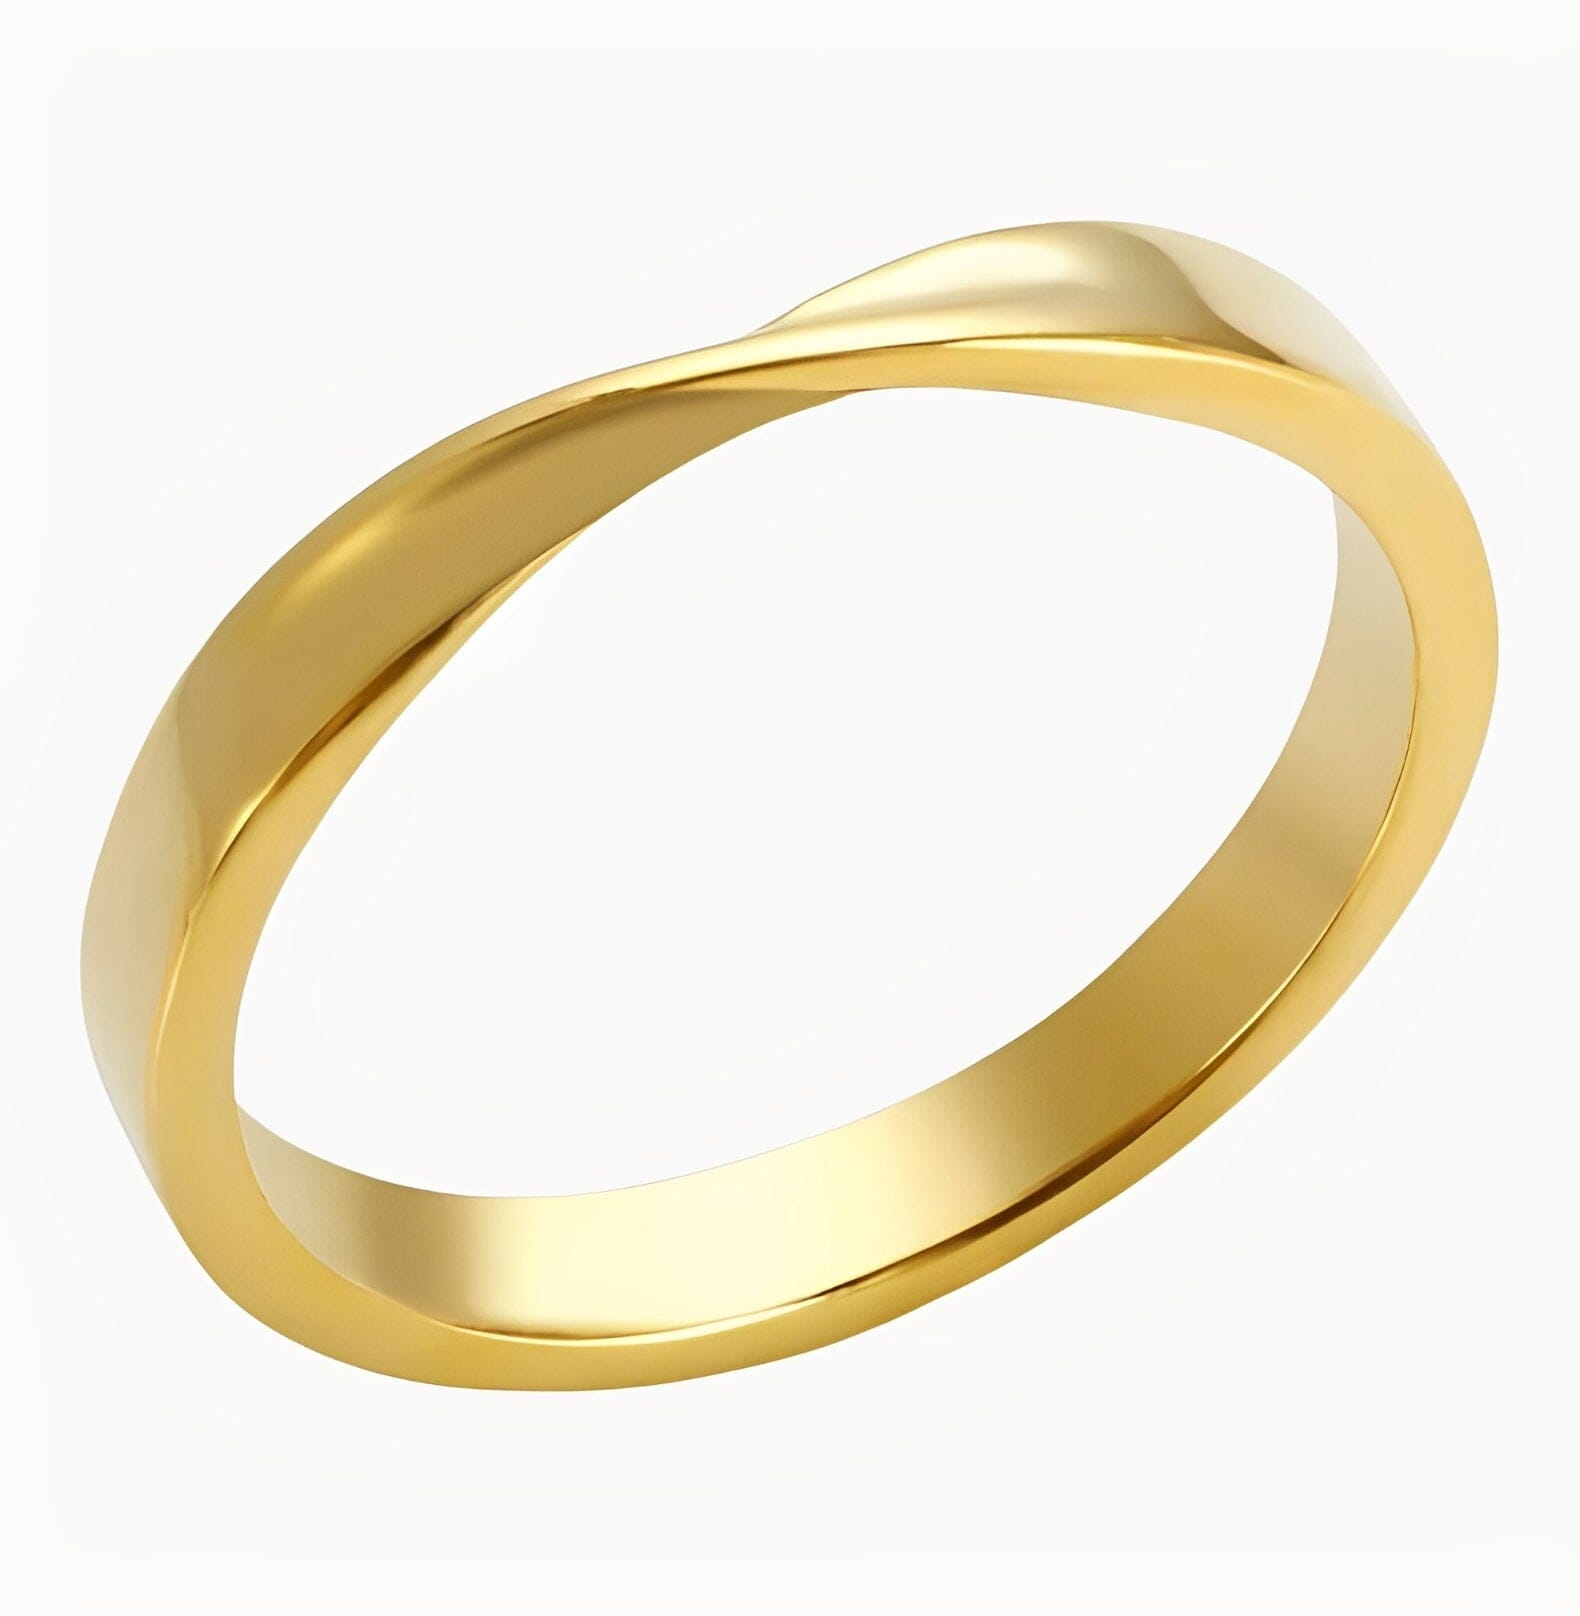 BRUGES RING - GOLD ring Yubama Jewelry Online Store - The Elegant Designs of Gold and Silver ! 